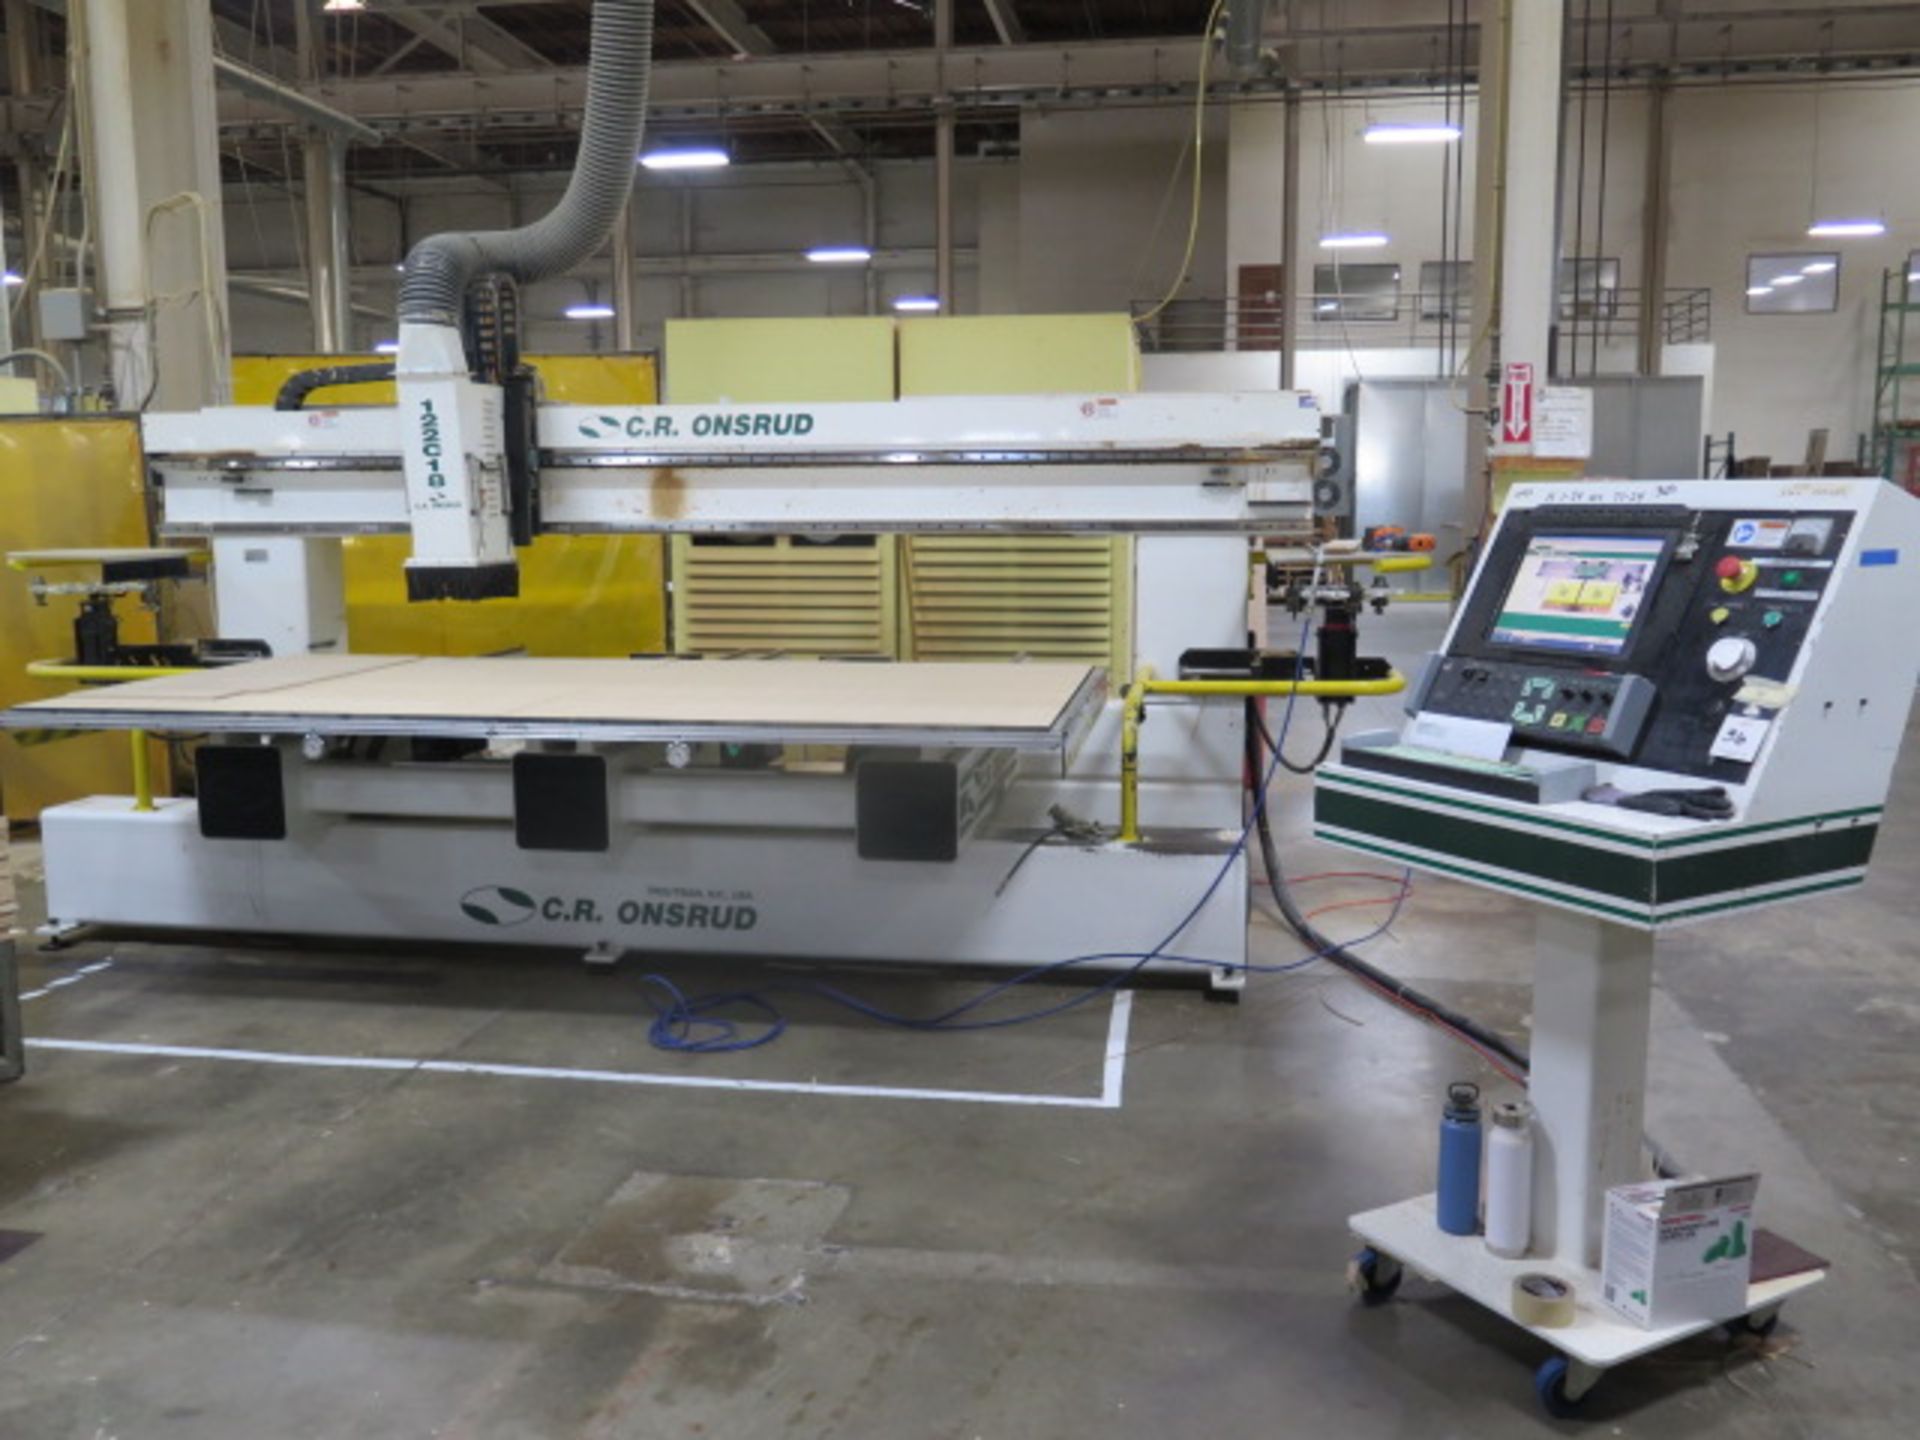 2008 C.R. Onsrud 122C18 CNC Router s/n 12280701 w/ WinMedia CNC Controls, SOLD AS IS